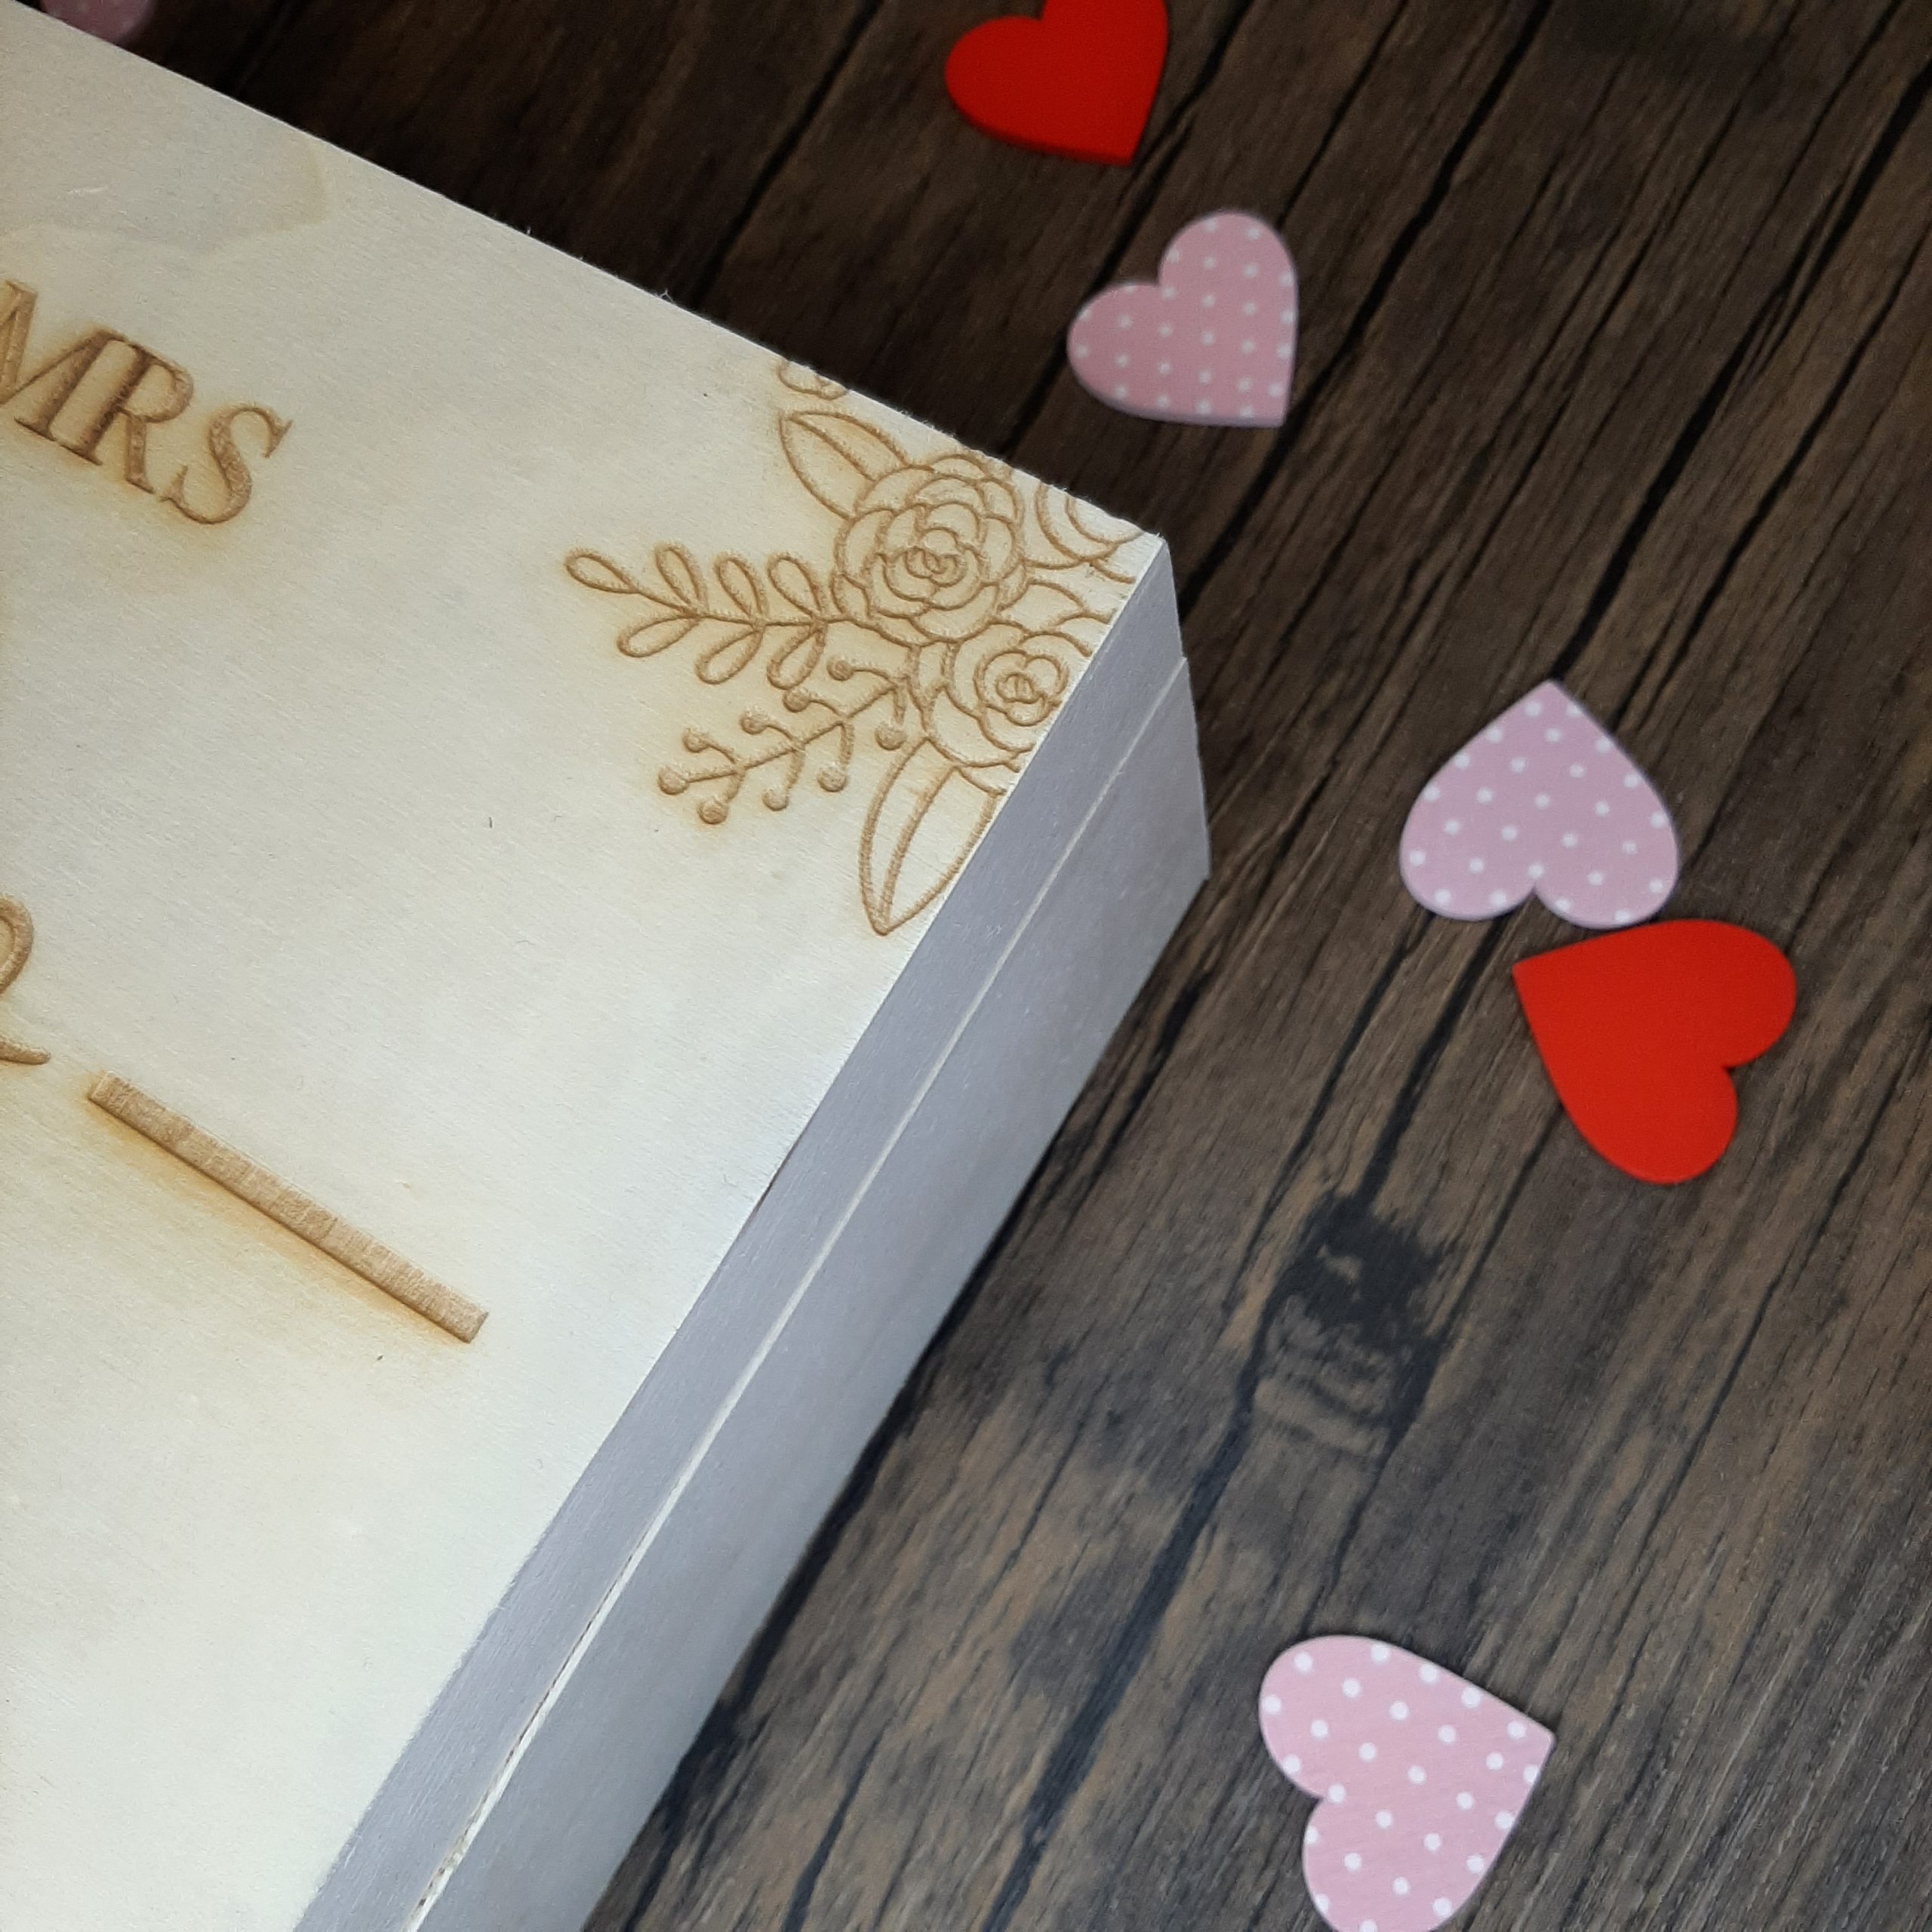 zoomed in to the engraving of flowers on the corner of the wedding keepsake box